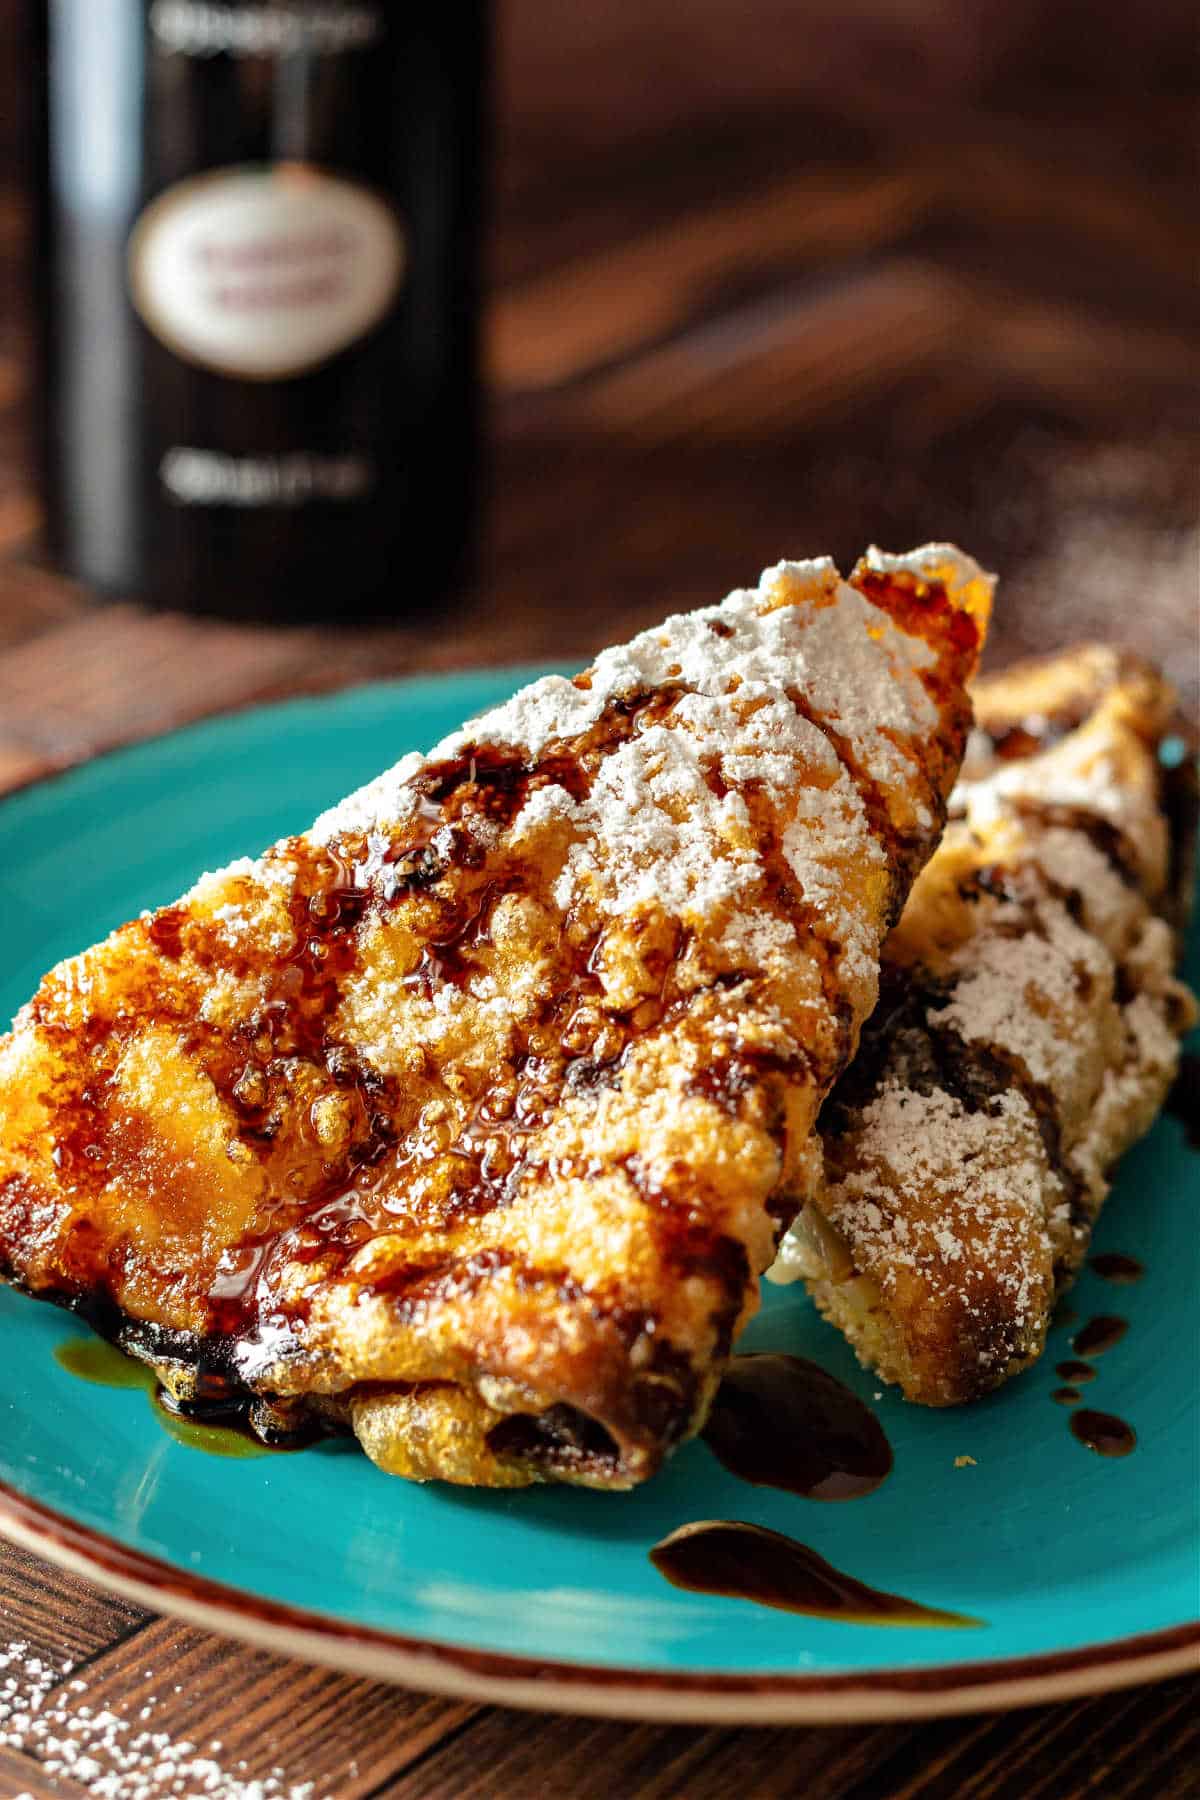 A battered and deep-fried triangle of filled creip drizzled with balsamic vinegar with a dusting of powdered sugar on it.